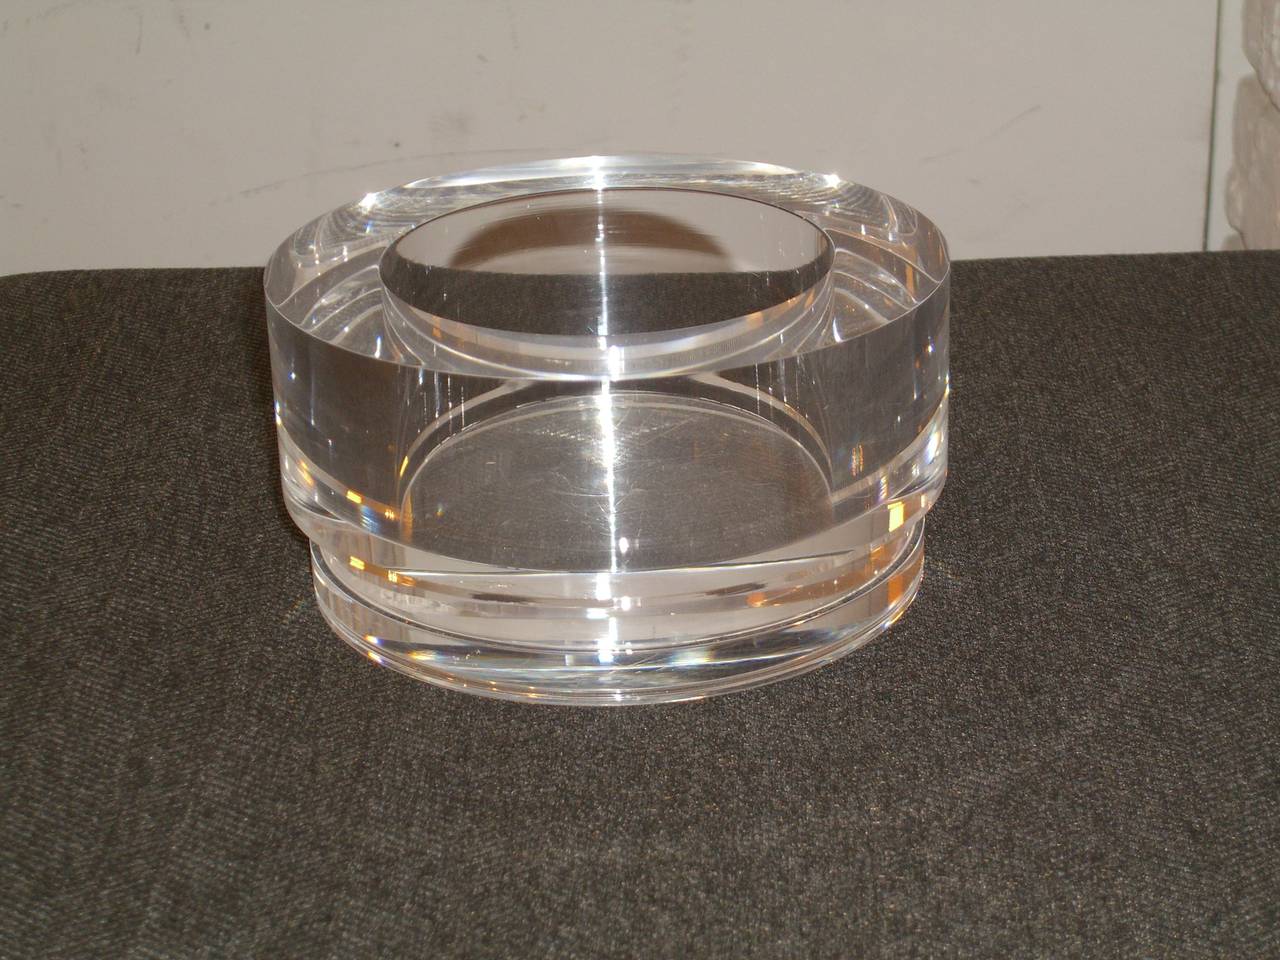 Very heavy Lucite bowl. Super clear and clean.